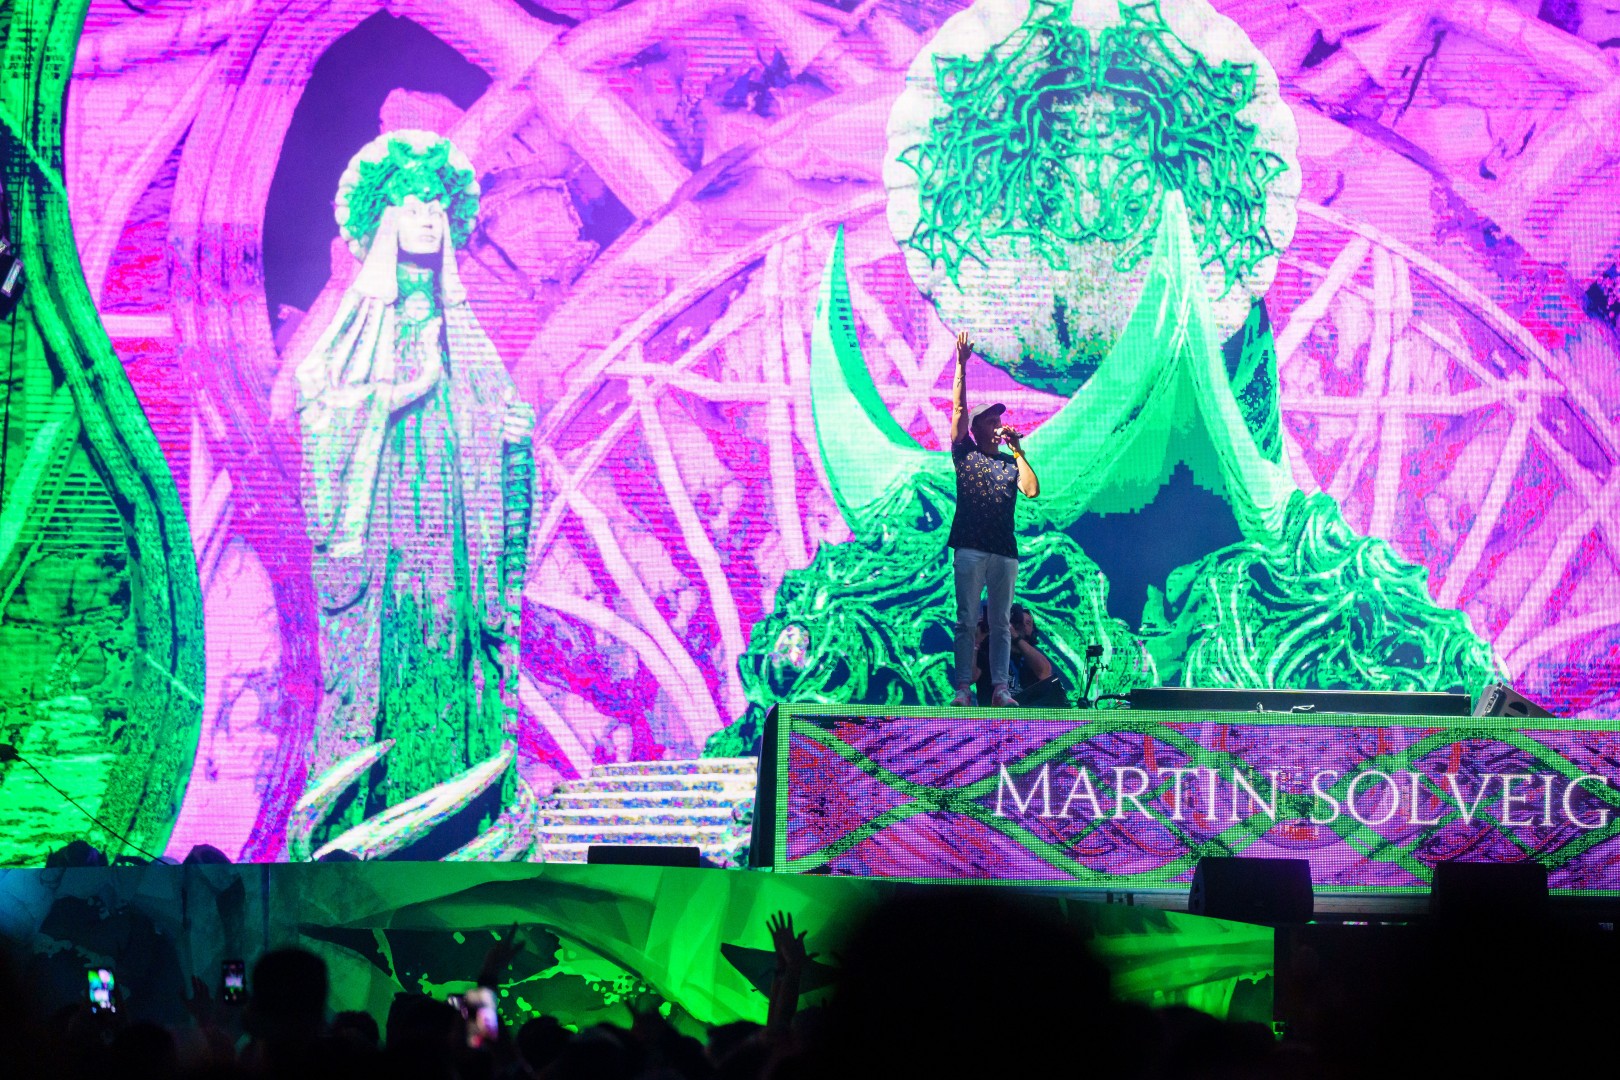 Martin Solveig at Cluj Arena in Cluj-Napoca on September 12, 2021 (c1b7a4f5fb)